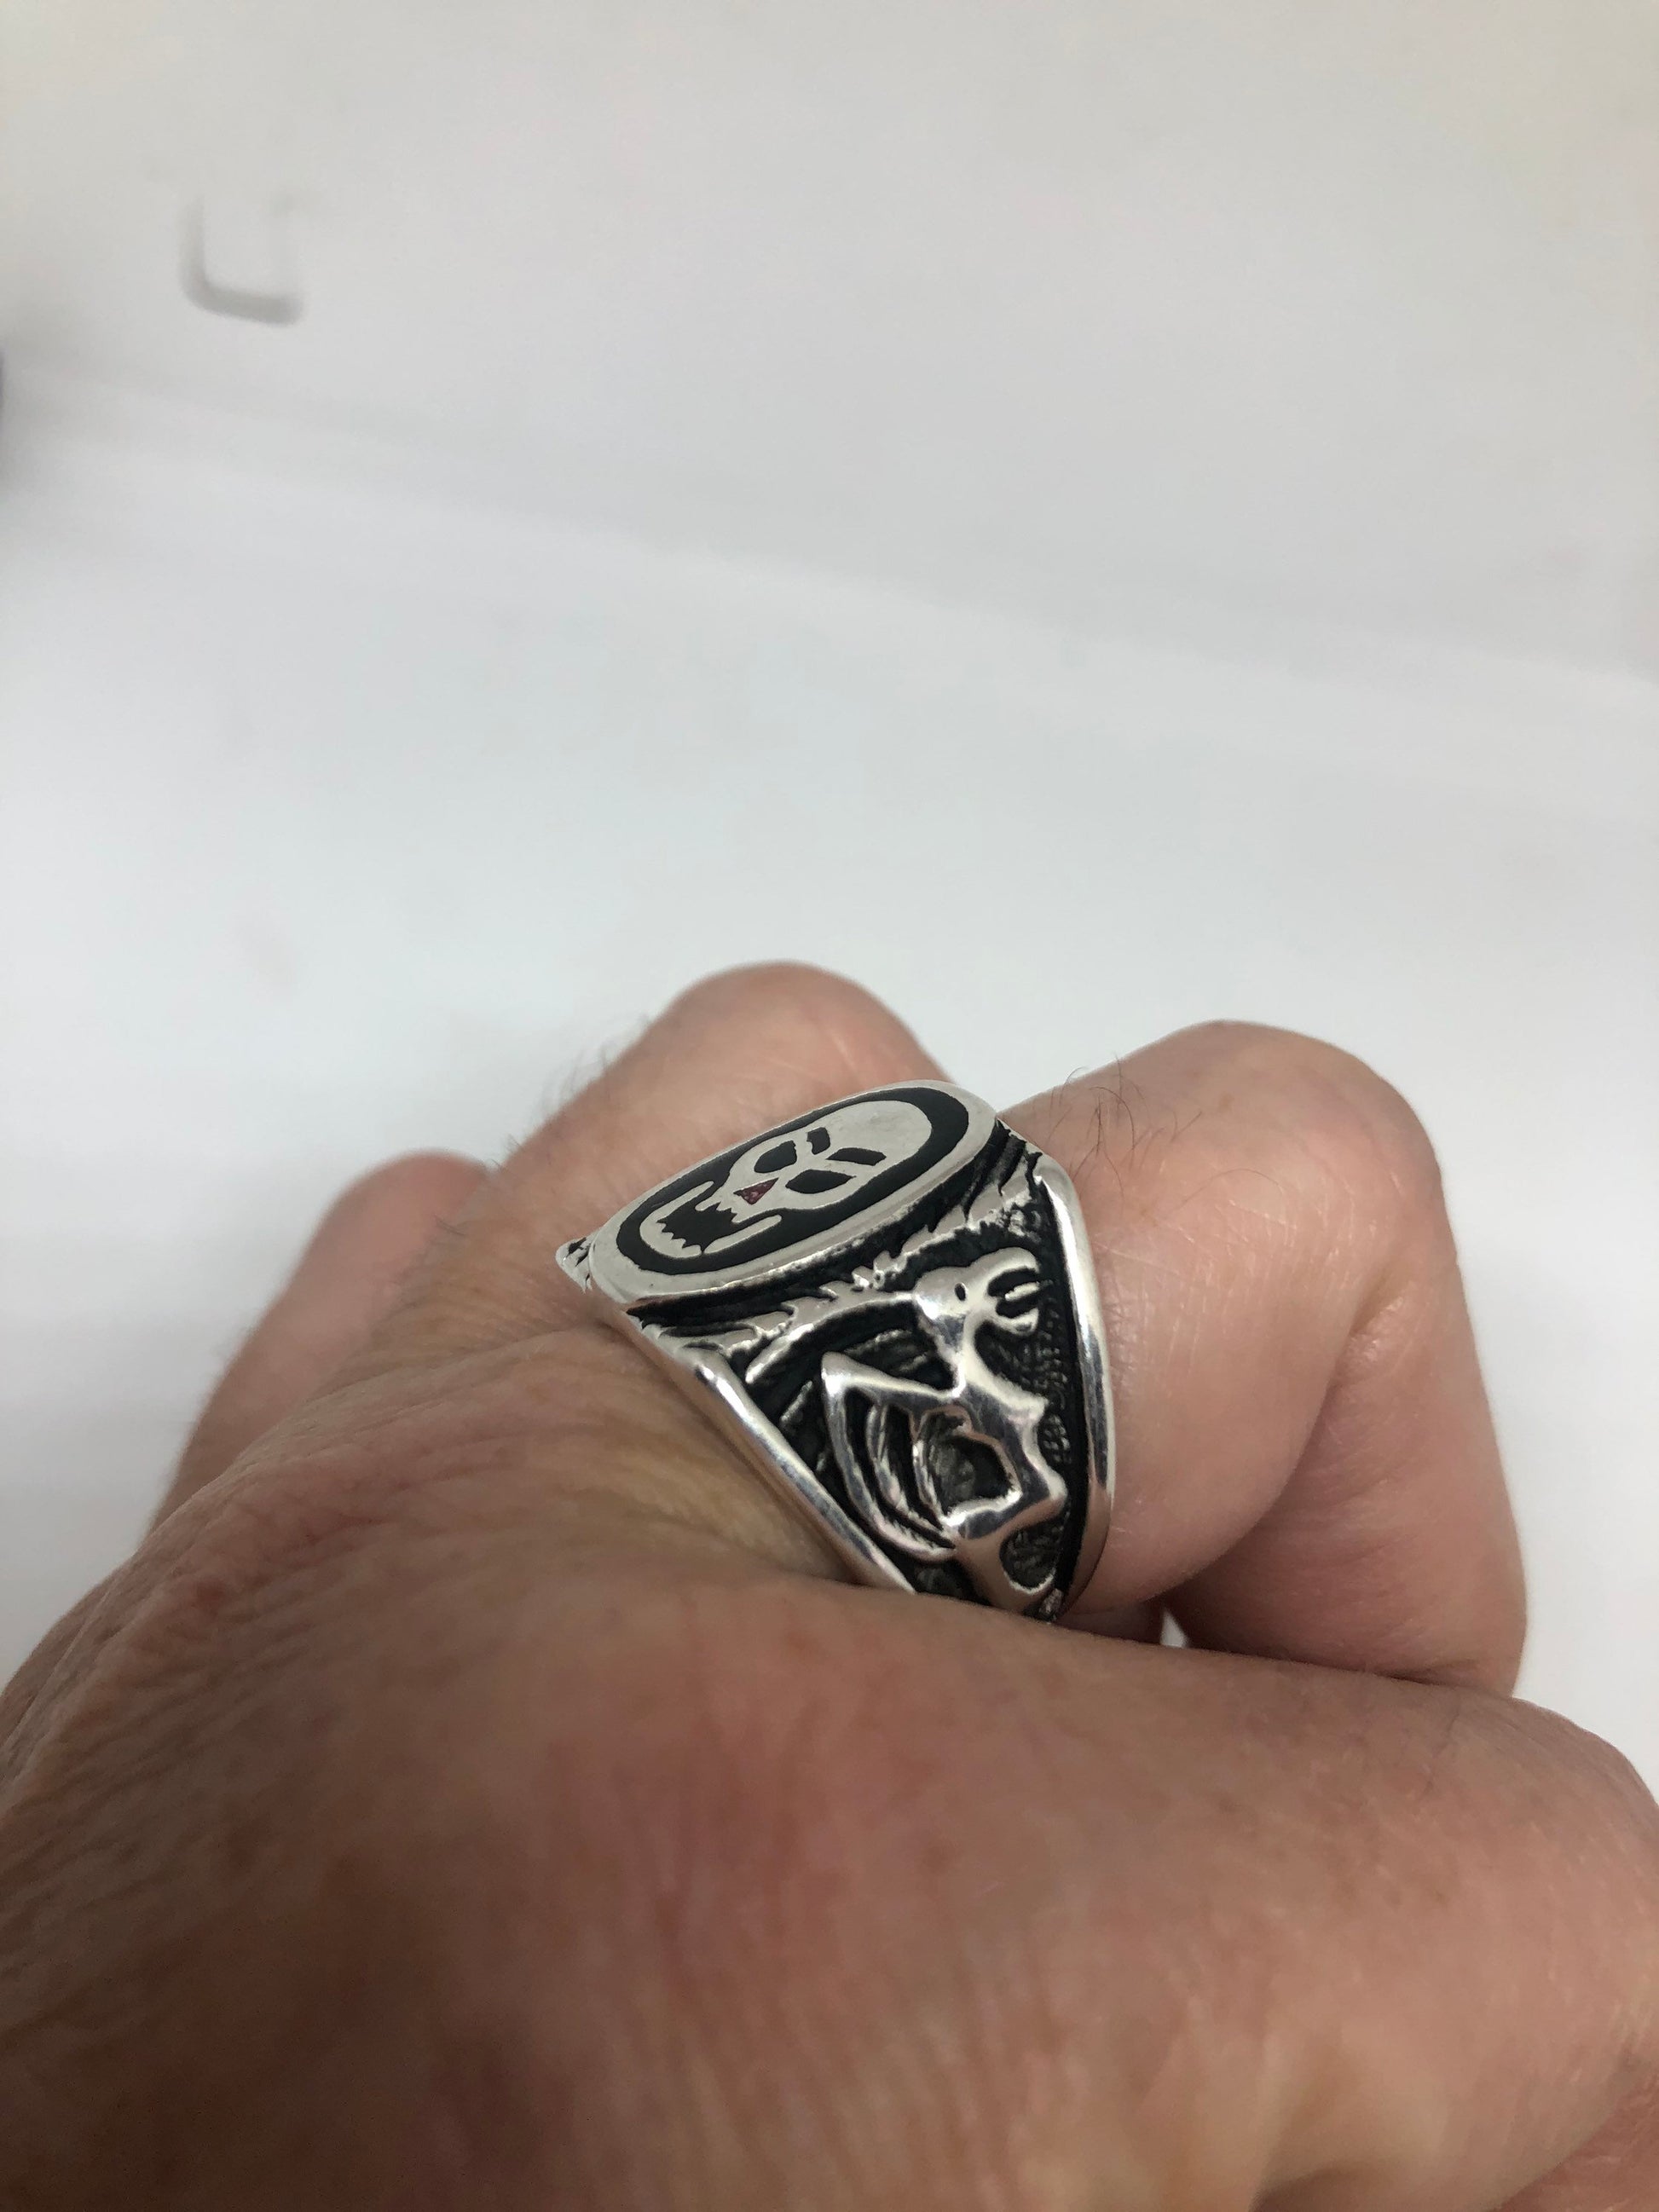 Vintage Southwestern Skull Ring in White Bronze with Black Stone Inlay